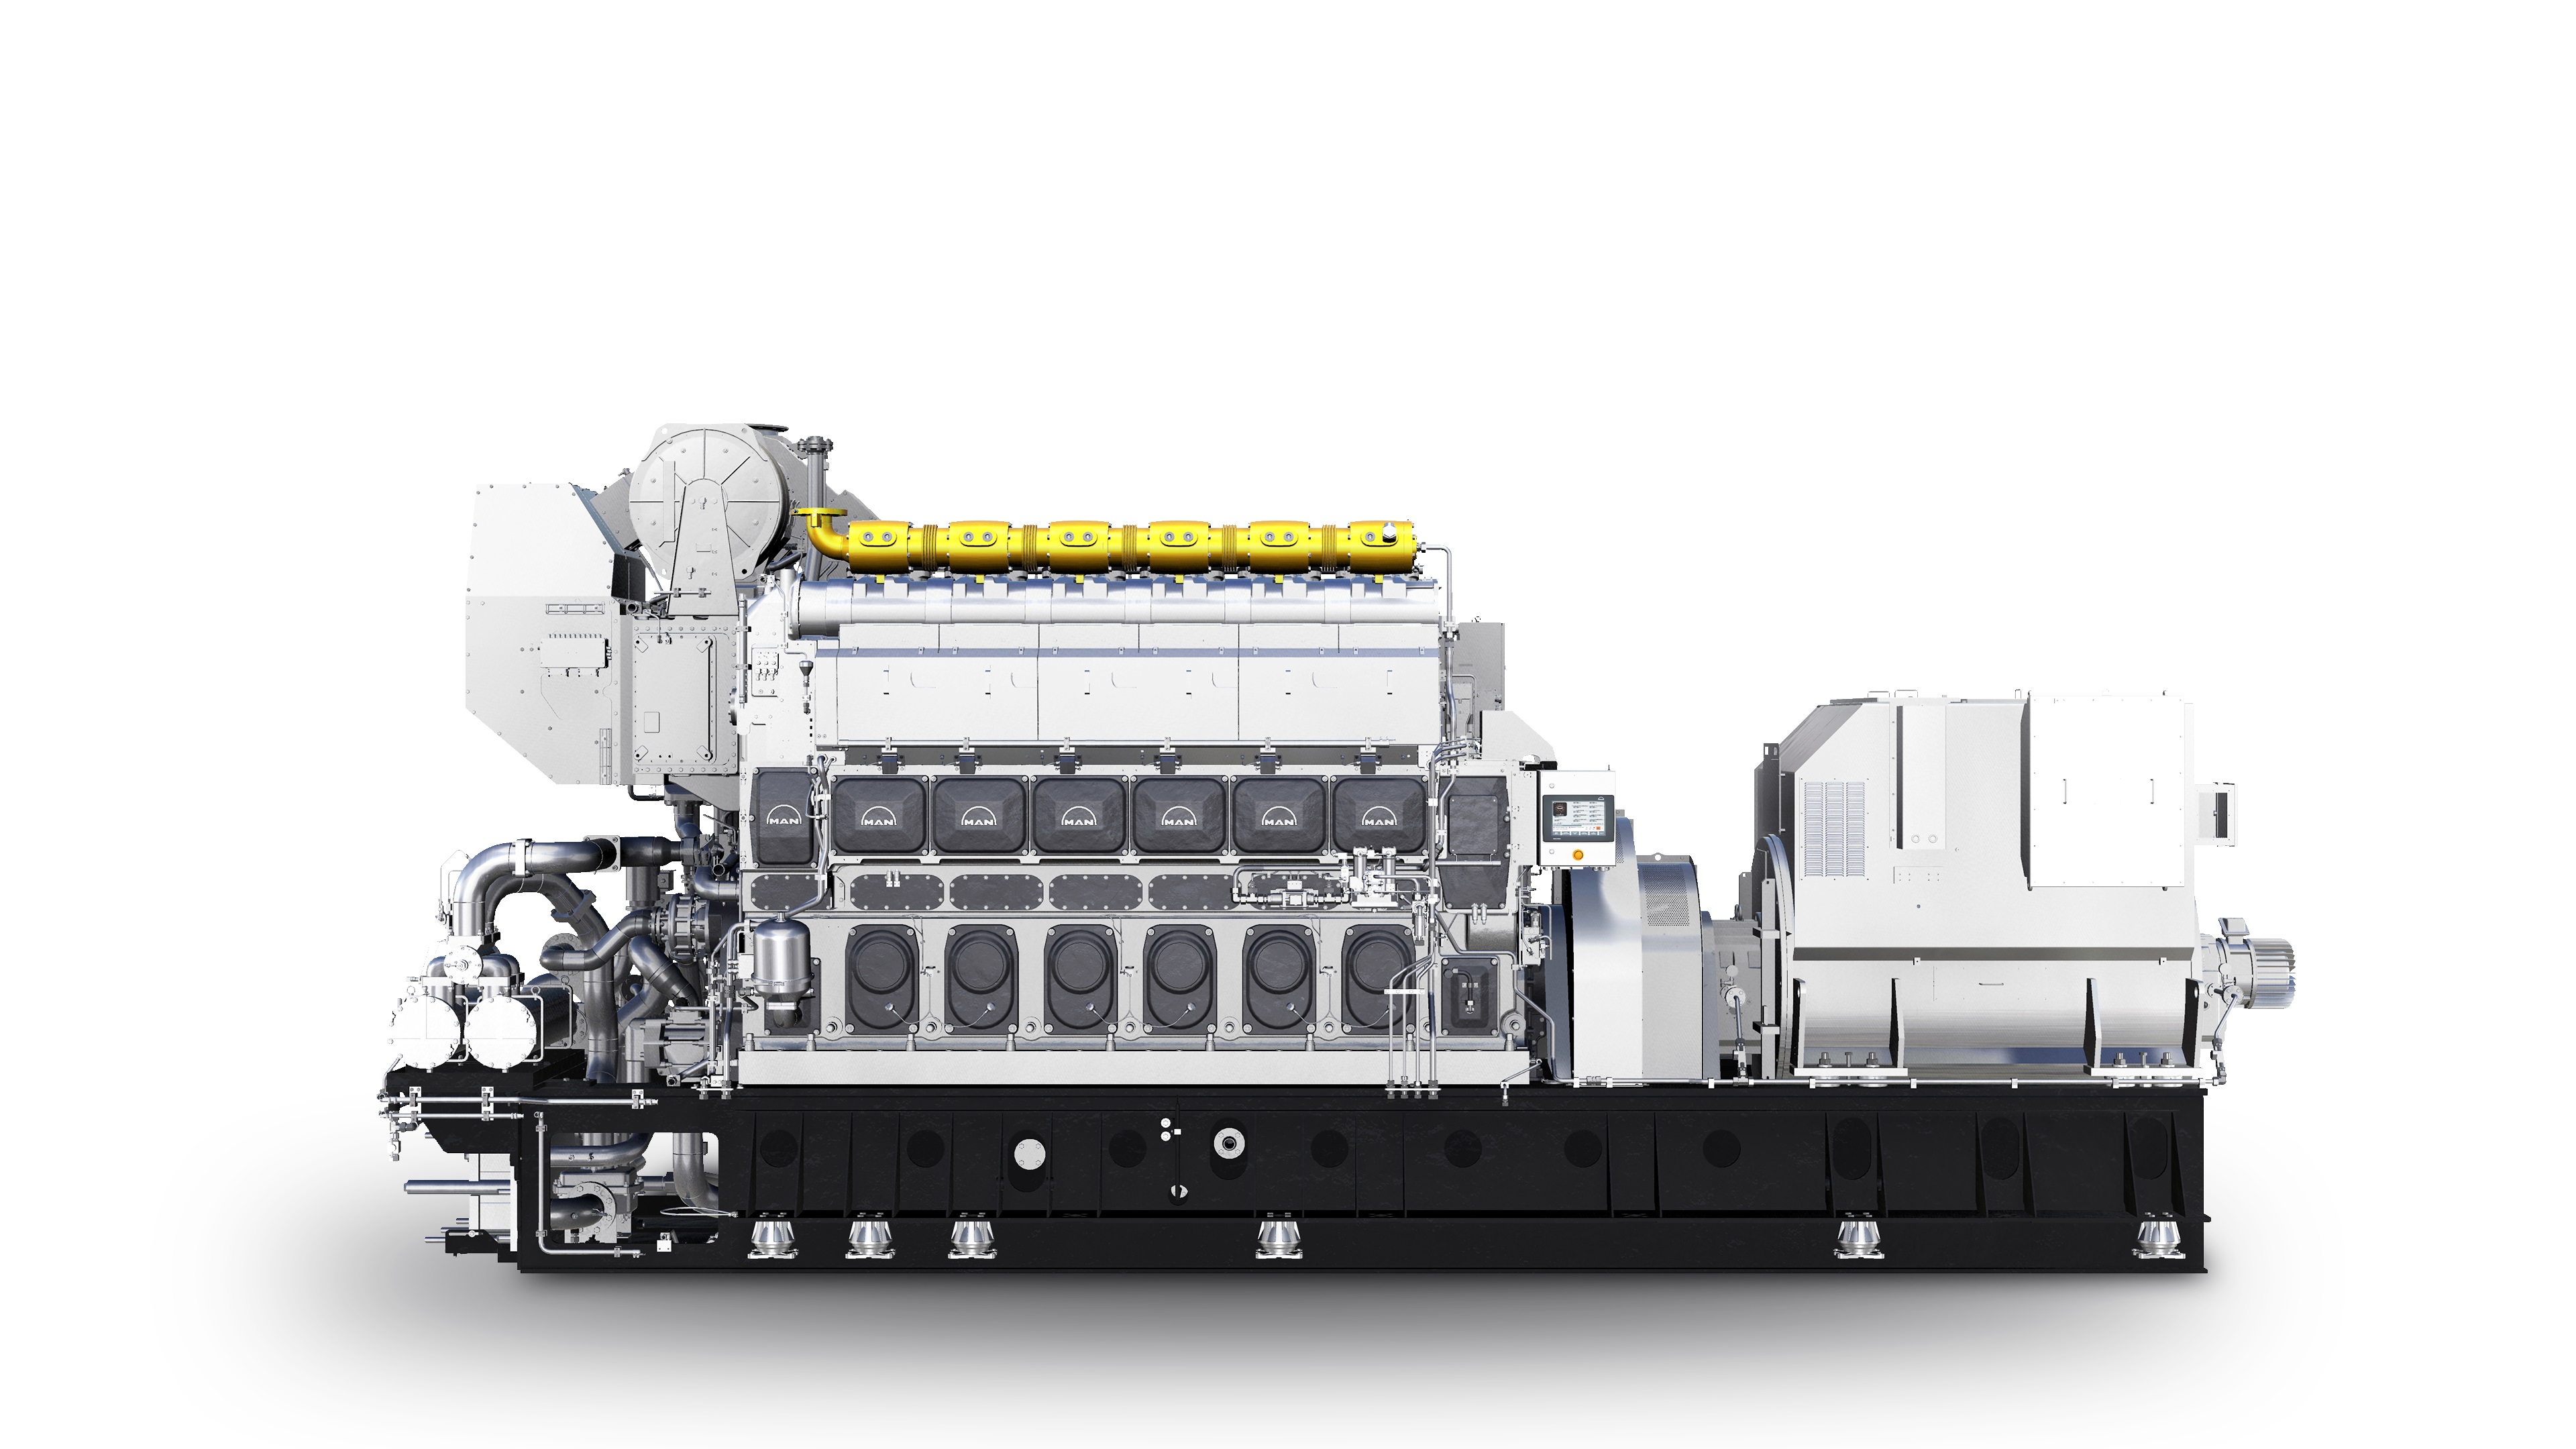 MAN 35/44DF CD GenSet Launched